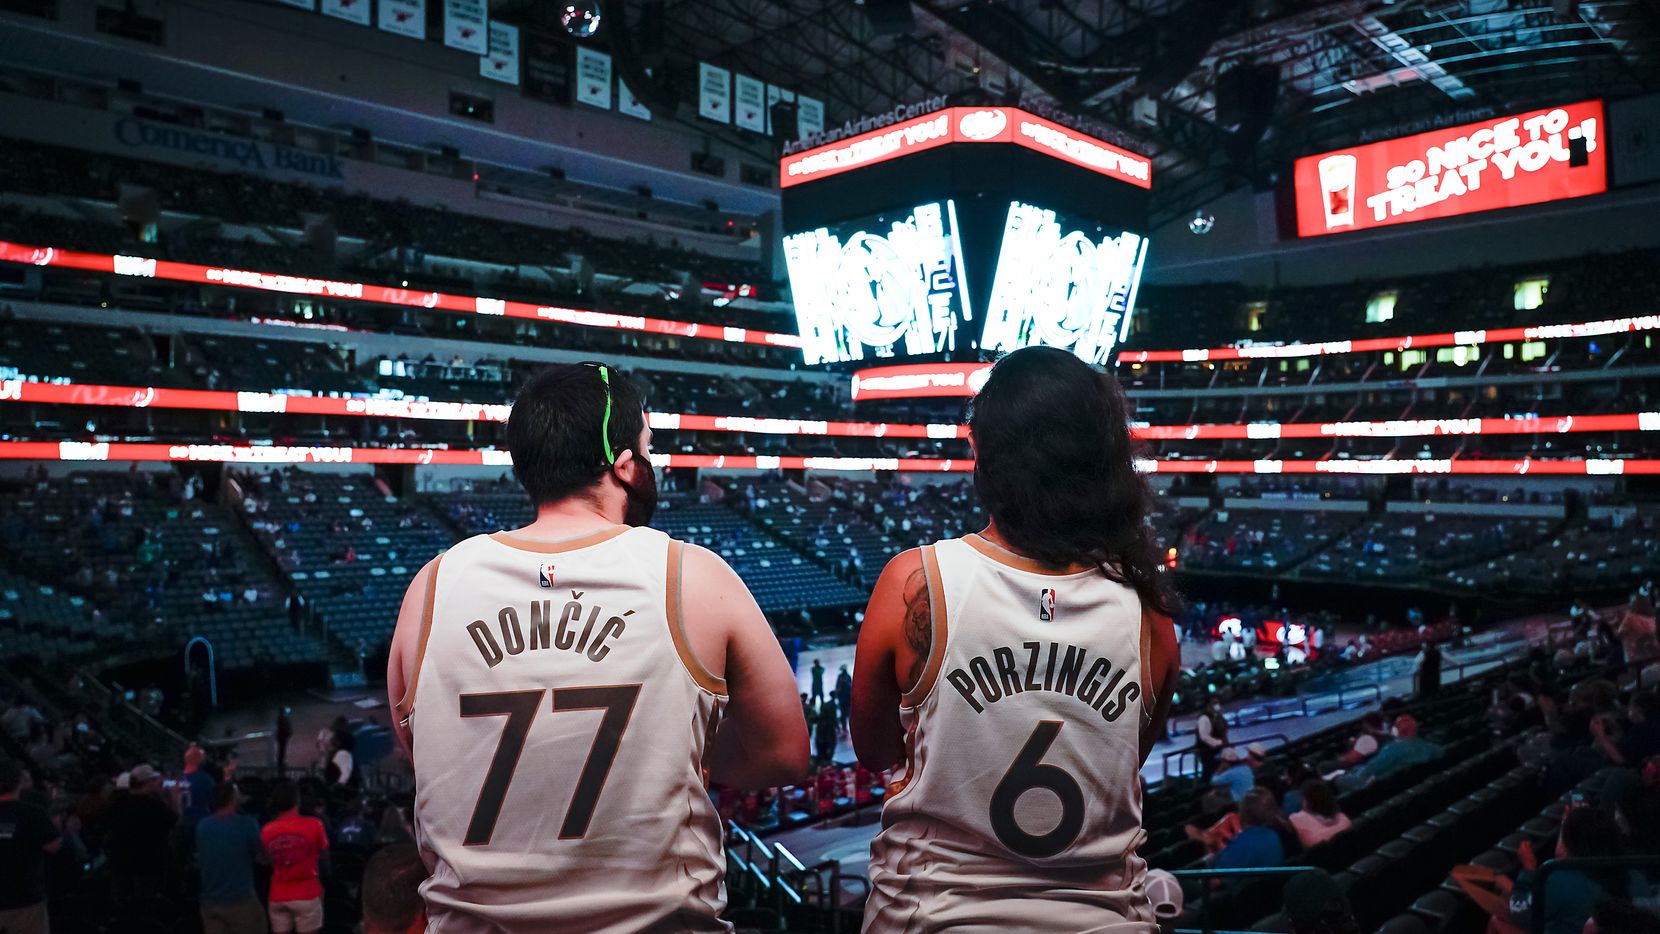 Fans wearing the jerseys of Dallas Mavericks guard Luka Doncic and Kristaps Porzingis cheer as the tea is announced before an NBA basketball game against the Sacramento Kings at American Airlines Center on Sunday, May 2, 2021, in Dallas.